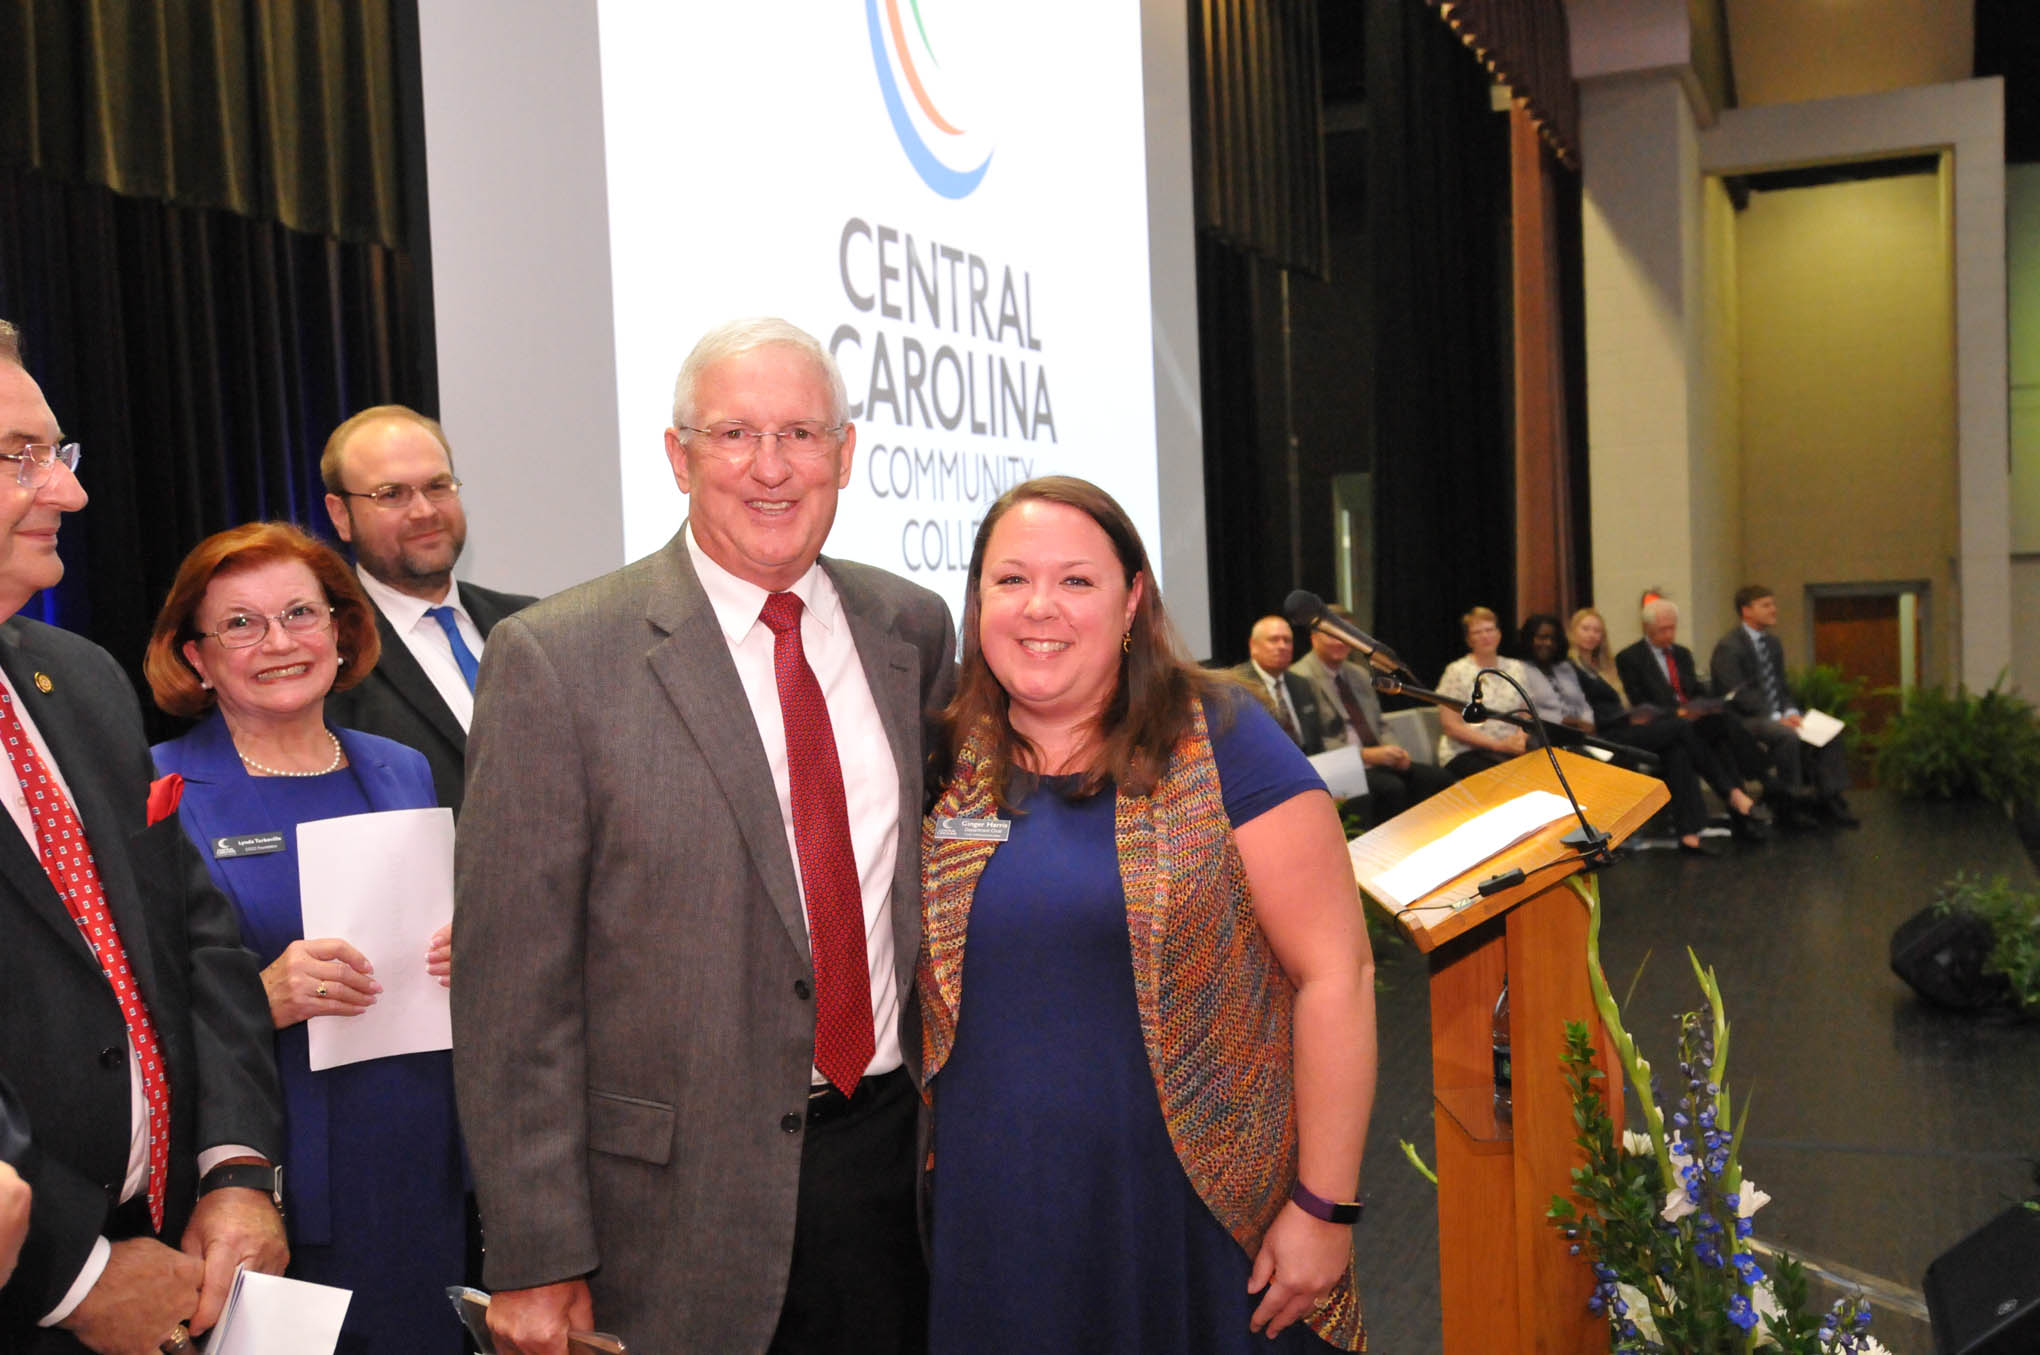 Click to enlarge,  Gary Beasley (left), Lead Instructor for Laser and Photonics Technology, was named 2019 Central Carolina Community College Faculty Member of the Year. Presenting the award is Ginger Harris (right), CCCC Early Childhood Chair and 2018 Faculty Member of the Year. The award was presented during the Convocation and Installation of Dr. Lisa M. Chapman as Sixth President of CCCC on Sept. 26. 